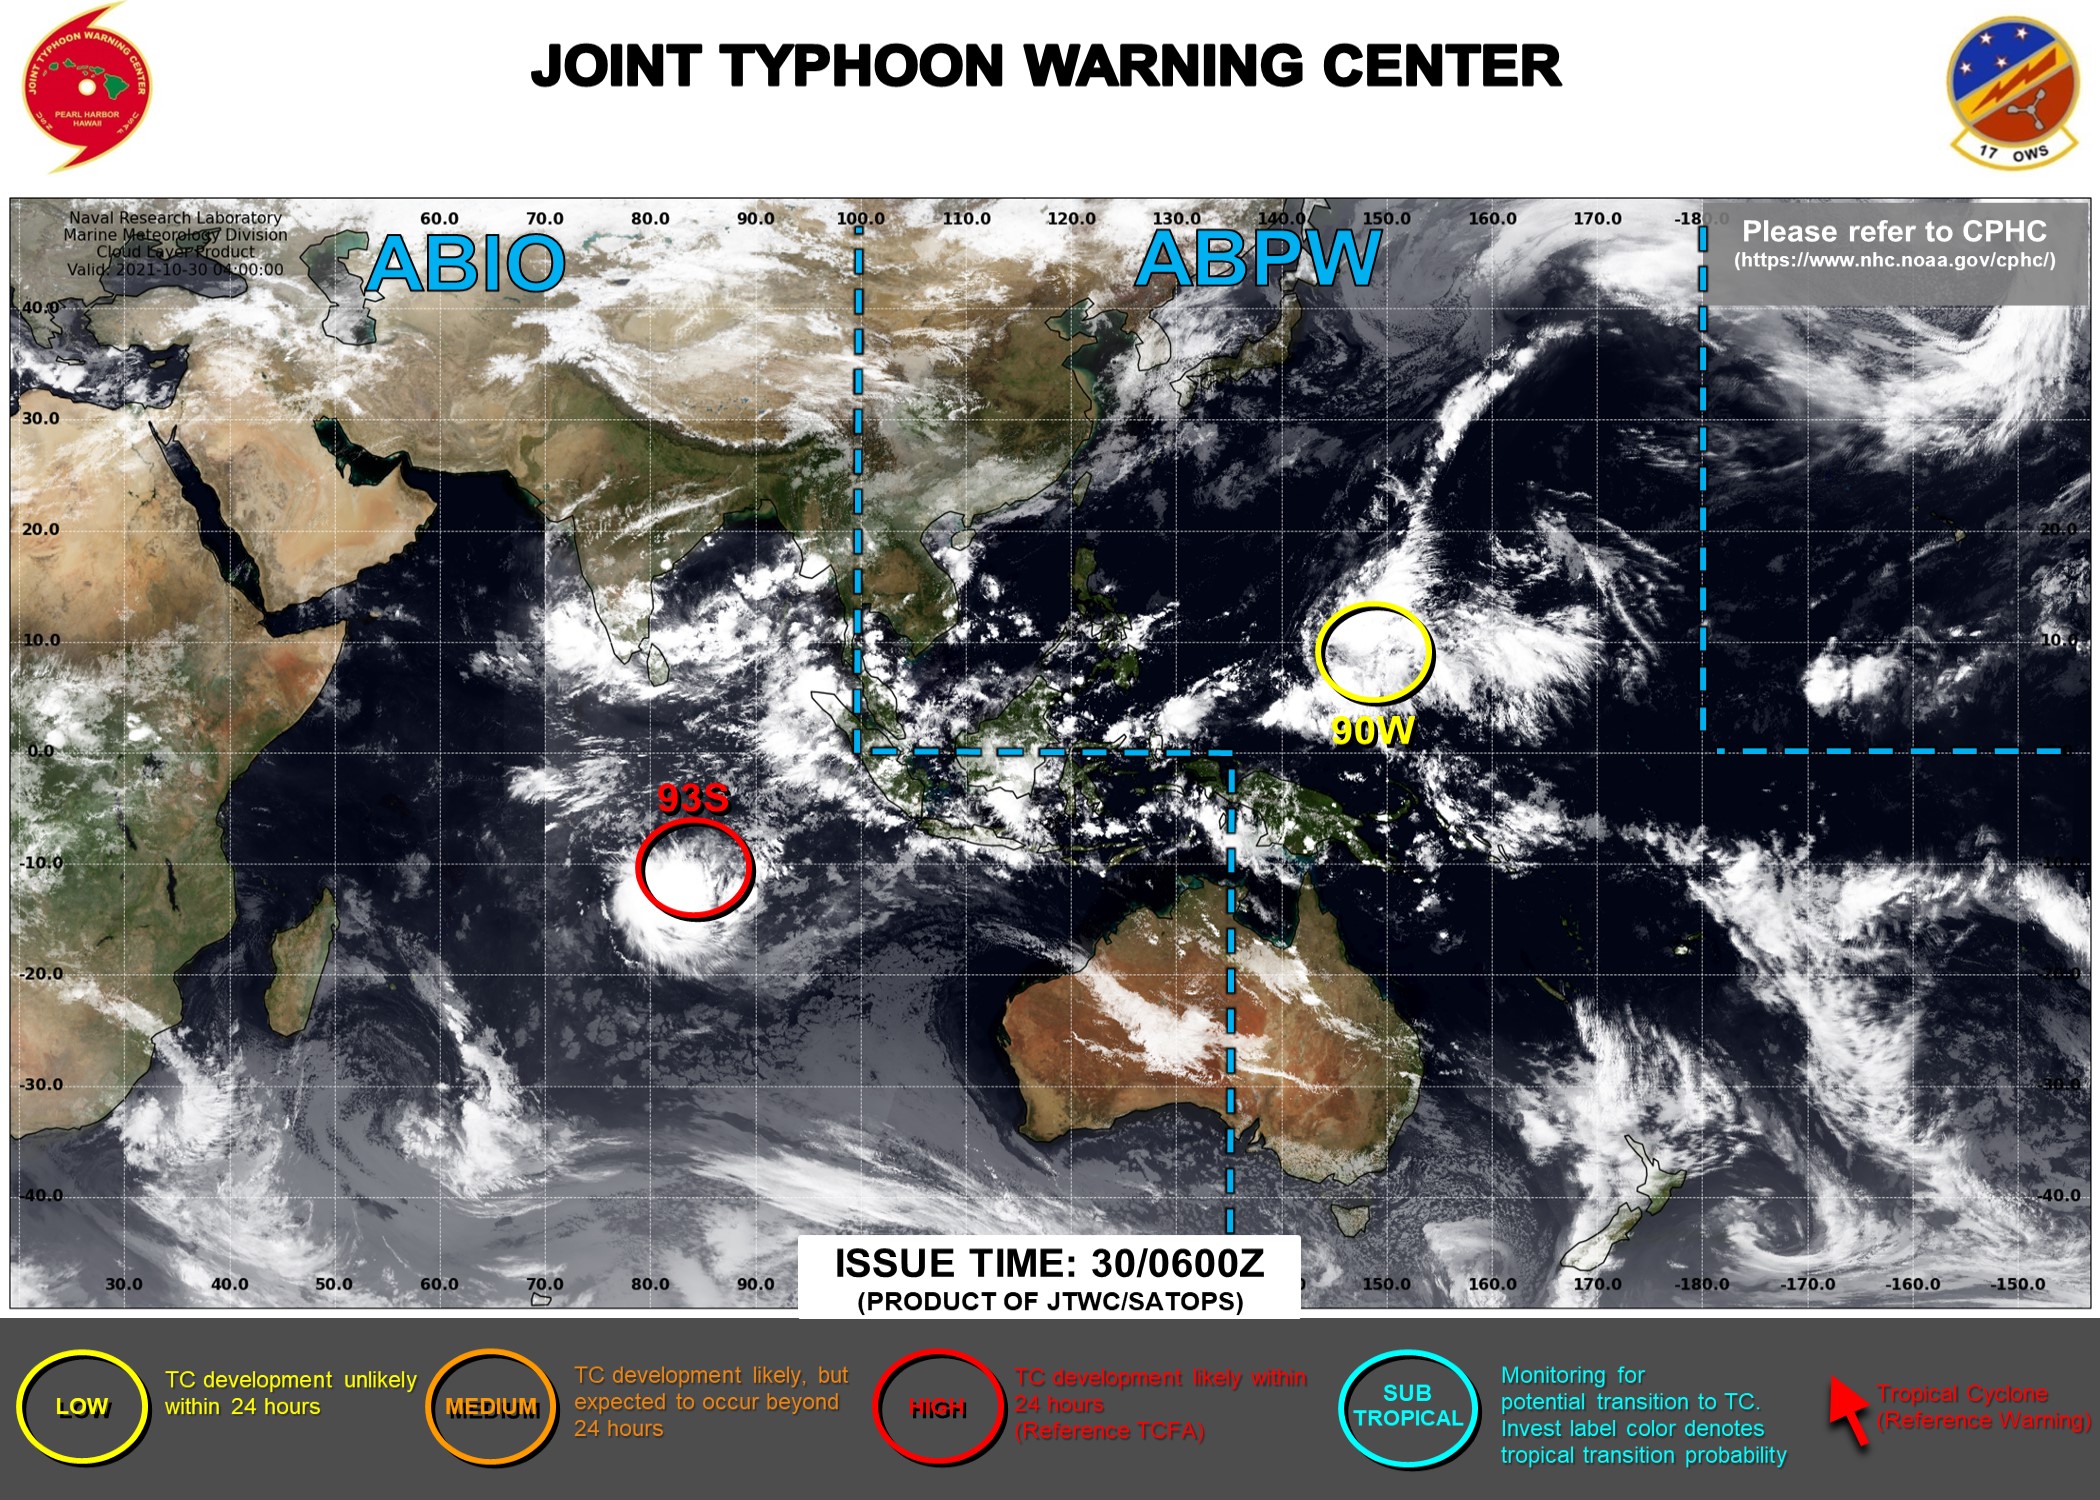 JTWC IS ISSUING 3HOURLY SATELLITE BULLETINS ON 93S.